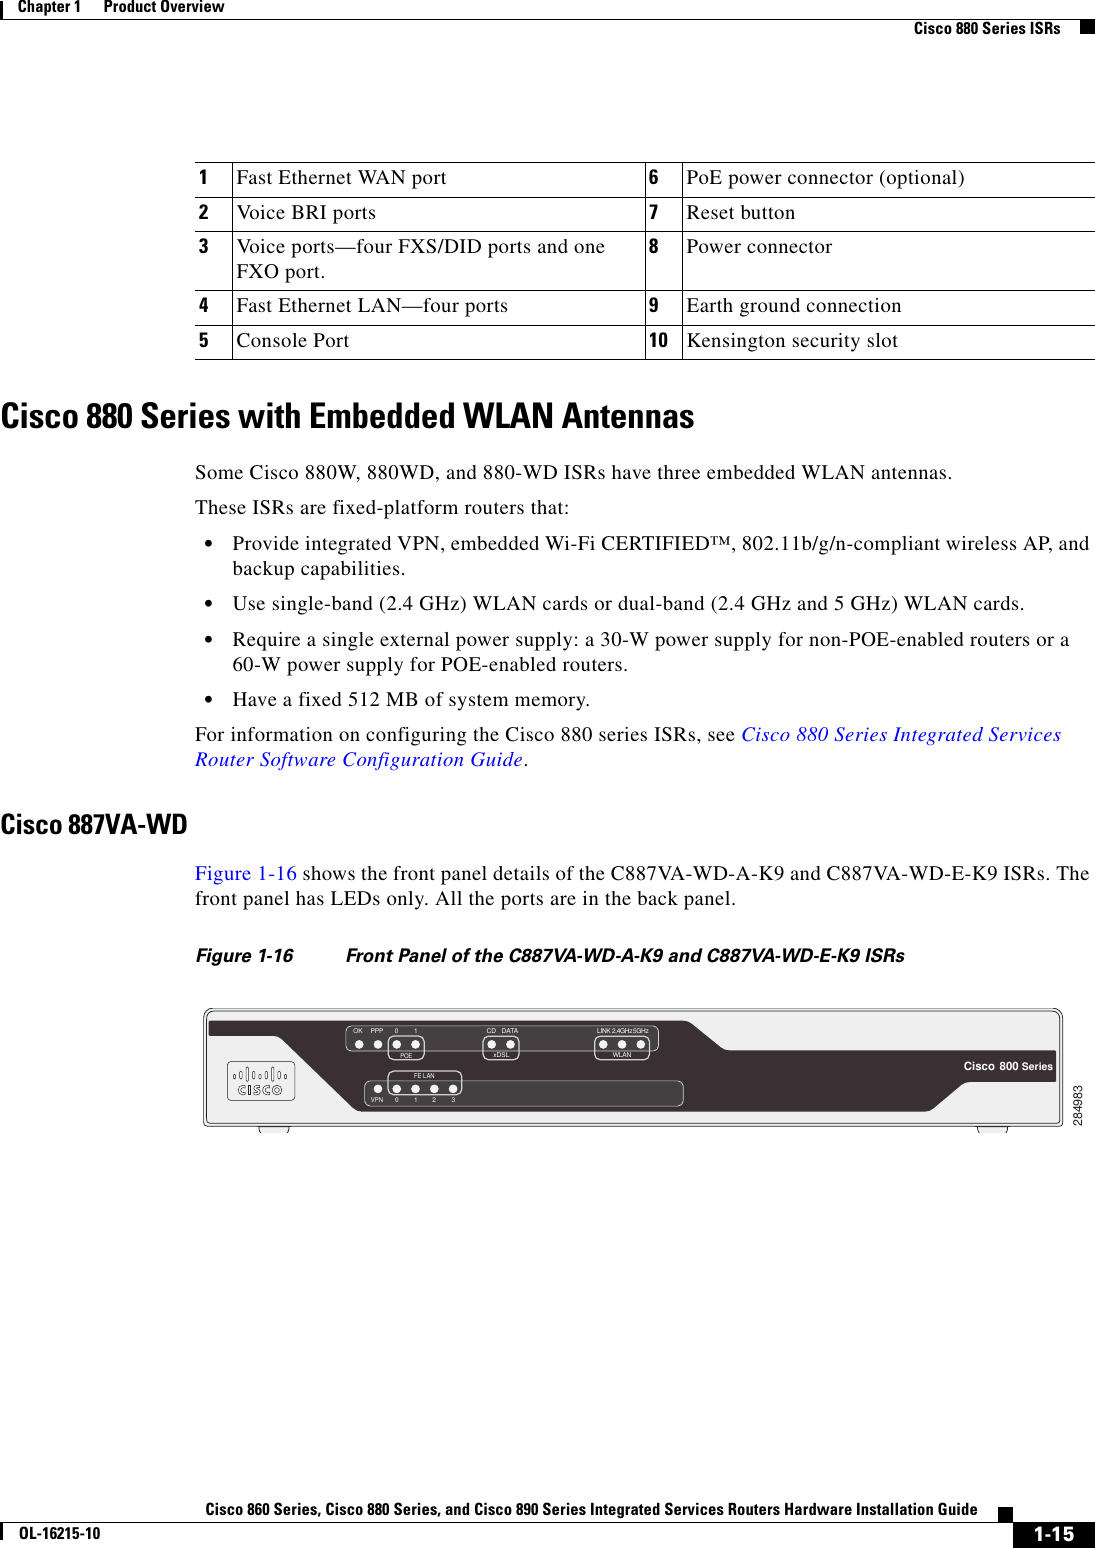  1-15Cisco 860 Series, Cisco 880 Series, and Cisco 890 Series Integrated Services Routers Hardware Installation GuideOL-16215-10Chapter 1      Product Overview  Cisco 880 Series ISRsCisco 880 Series with Embedded WLAN AntennasSome Cisco 880W, 880WD, and 880-WD ISRs have three embedded WLAN antennas. These ISRs are fixed-platform routers that:  • Provide integrated VPN, embedded Wi-Fi CERTIFIED™, 802.11b/g/n-compliant wireless AP, and backup capabilities.  • Use single-band (2.4 GHz) WLAN cards or dual-band (2.4 GHz and 5 GHz) WLAN cards.   • Require a single external power supply: a 30-W power supply for non-POE-enabled routers or a 60-W power supply for POE-enabled routers.  • Have a fixed 512 MB of system memory.For information on configuring the Cisco 880 series ISRs, see Cisco 880 Series Integrated Services Router Software Configuration Guide.Cisco 887VA-WDFigure 1-16 shows the front panel details of the C887VA-WD-A-K9 and C887VA-WD-E-K9 ISRs. The front panel has LEDs only. All the ports are in the back panel.Figure 1-16 Front Panel of the C887VA-WD-A-K9 and C887VA-WD-E-K9 ISRs1Fast Ethernet WAN port 6PoE power connector (optional)2Voice BRI ports 7Reset button3Voice ports—four FXS/DID ports and one FXO port.8Power connector4Fast Ethernet LAN—four ports 9Earth ground connection5Console Port 10 Kensington security slot284983OK PPPWLANPOE01LINK 2.4GHz 5GHzCisco  800 SeriesFE LANVPN0123xDSLCD DATA